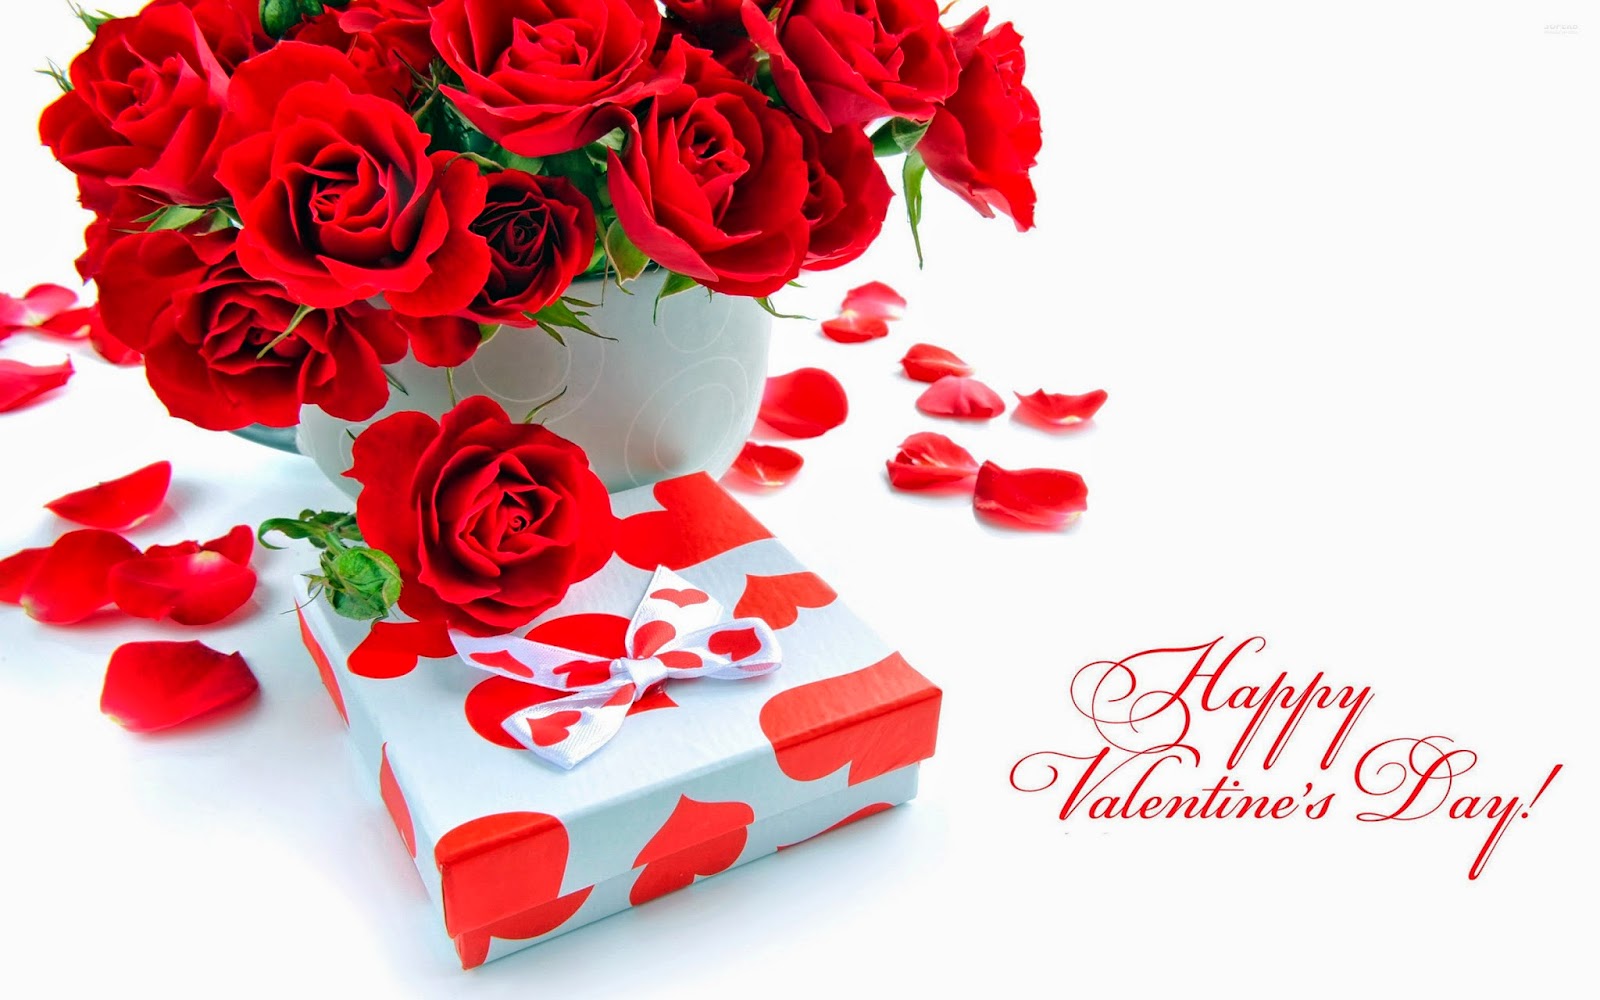 Happy Valentines’ Day Images pictures wallpapers (6)